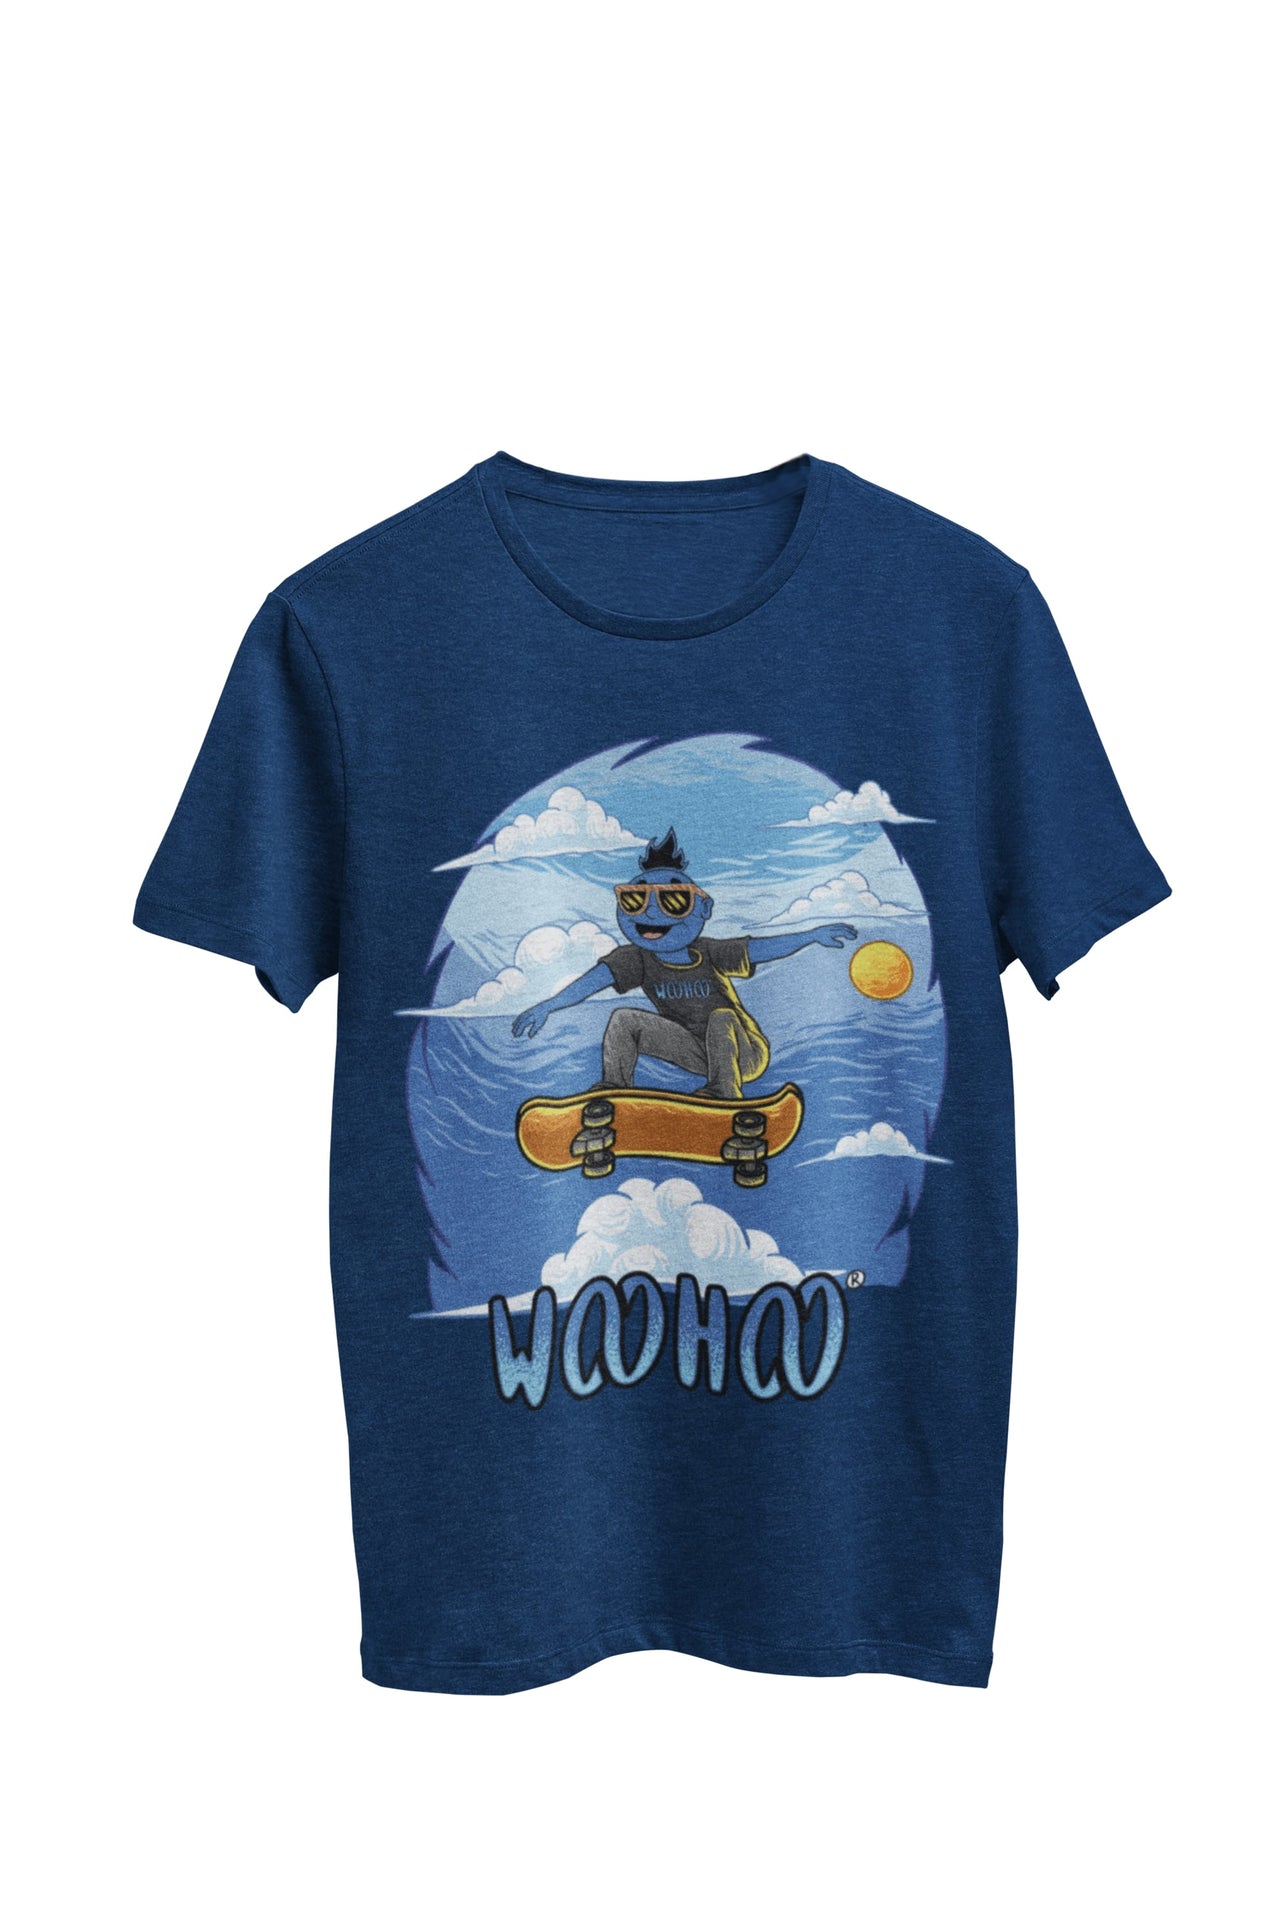 WooHooBerry soaring through the sky on a skateboard, exuding a sense of freedom and adventure. Sporting sunglasses and a navy T-shirt adorned with an artistic 'WooHoo' text, the scene captures the carefree spirit of outdoor fun